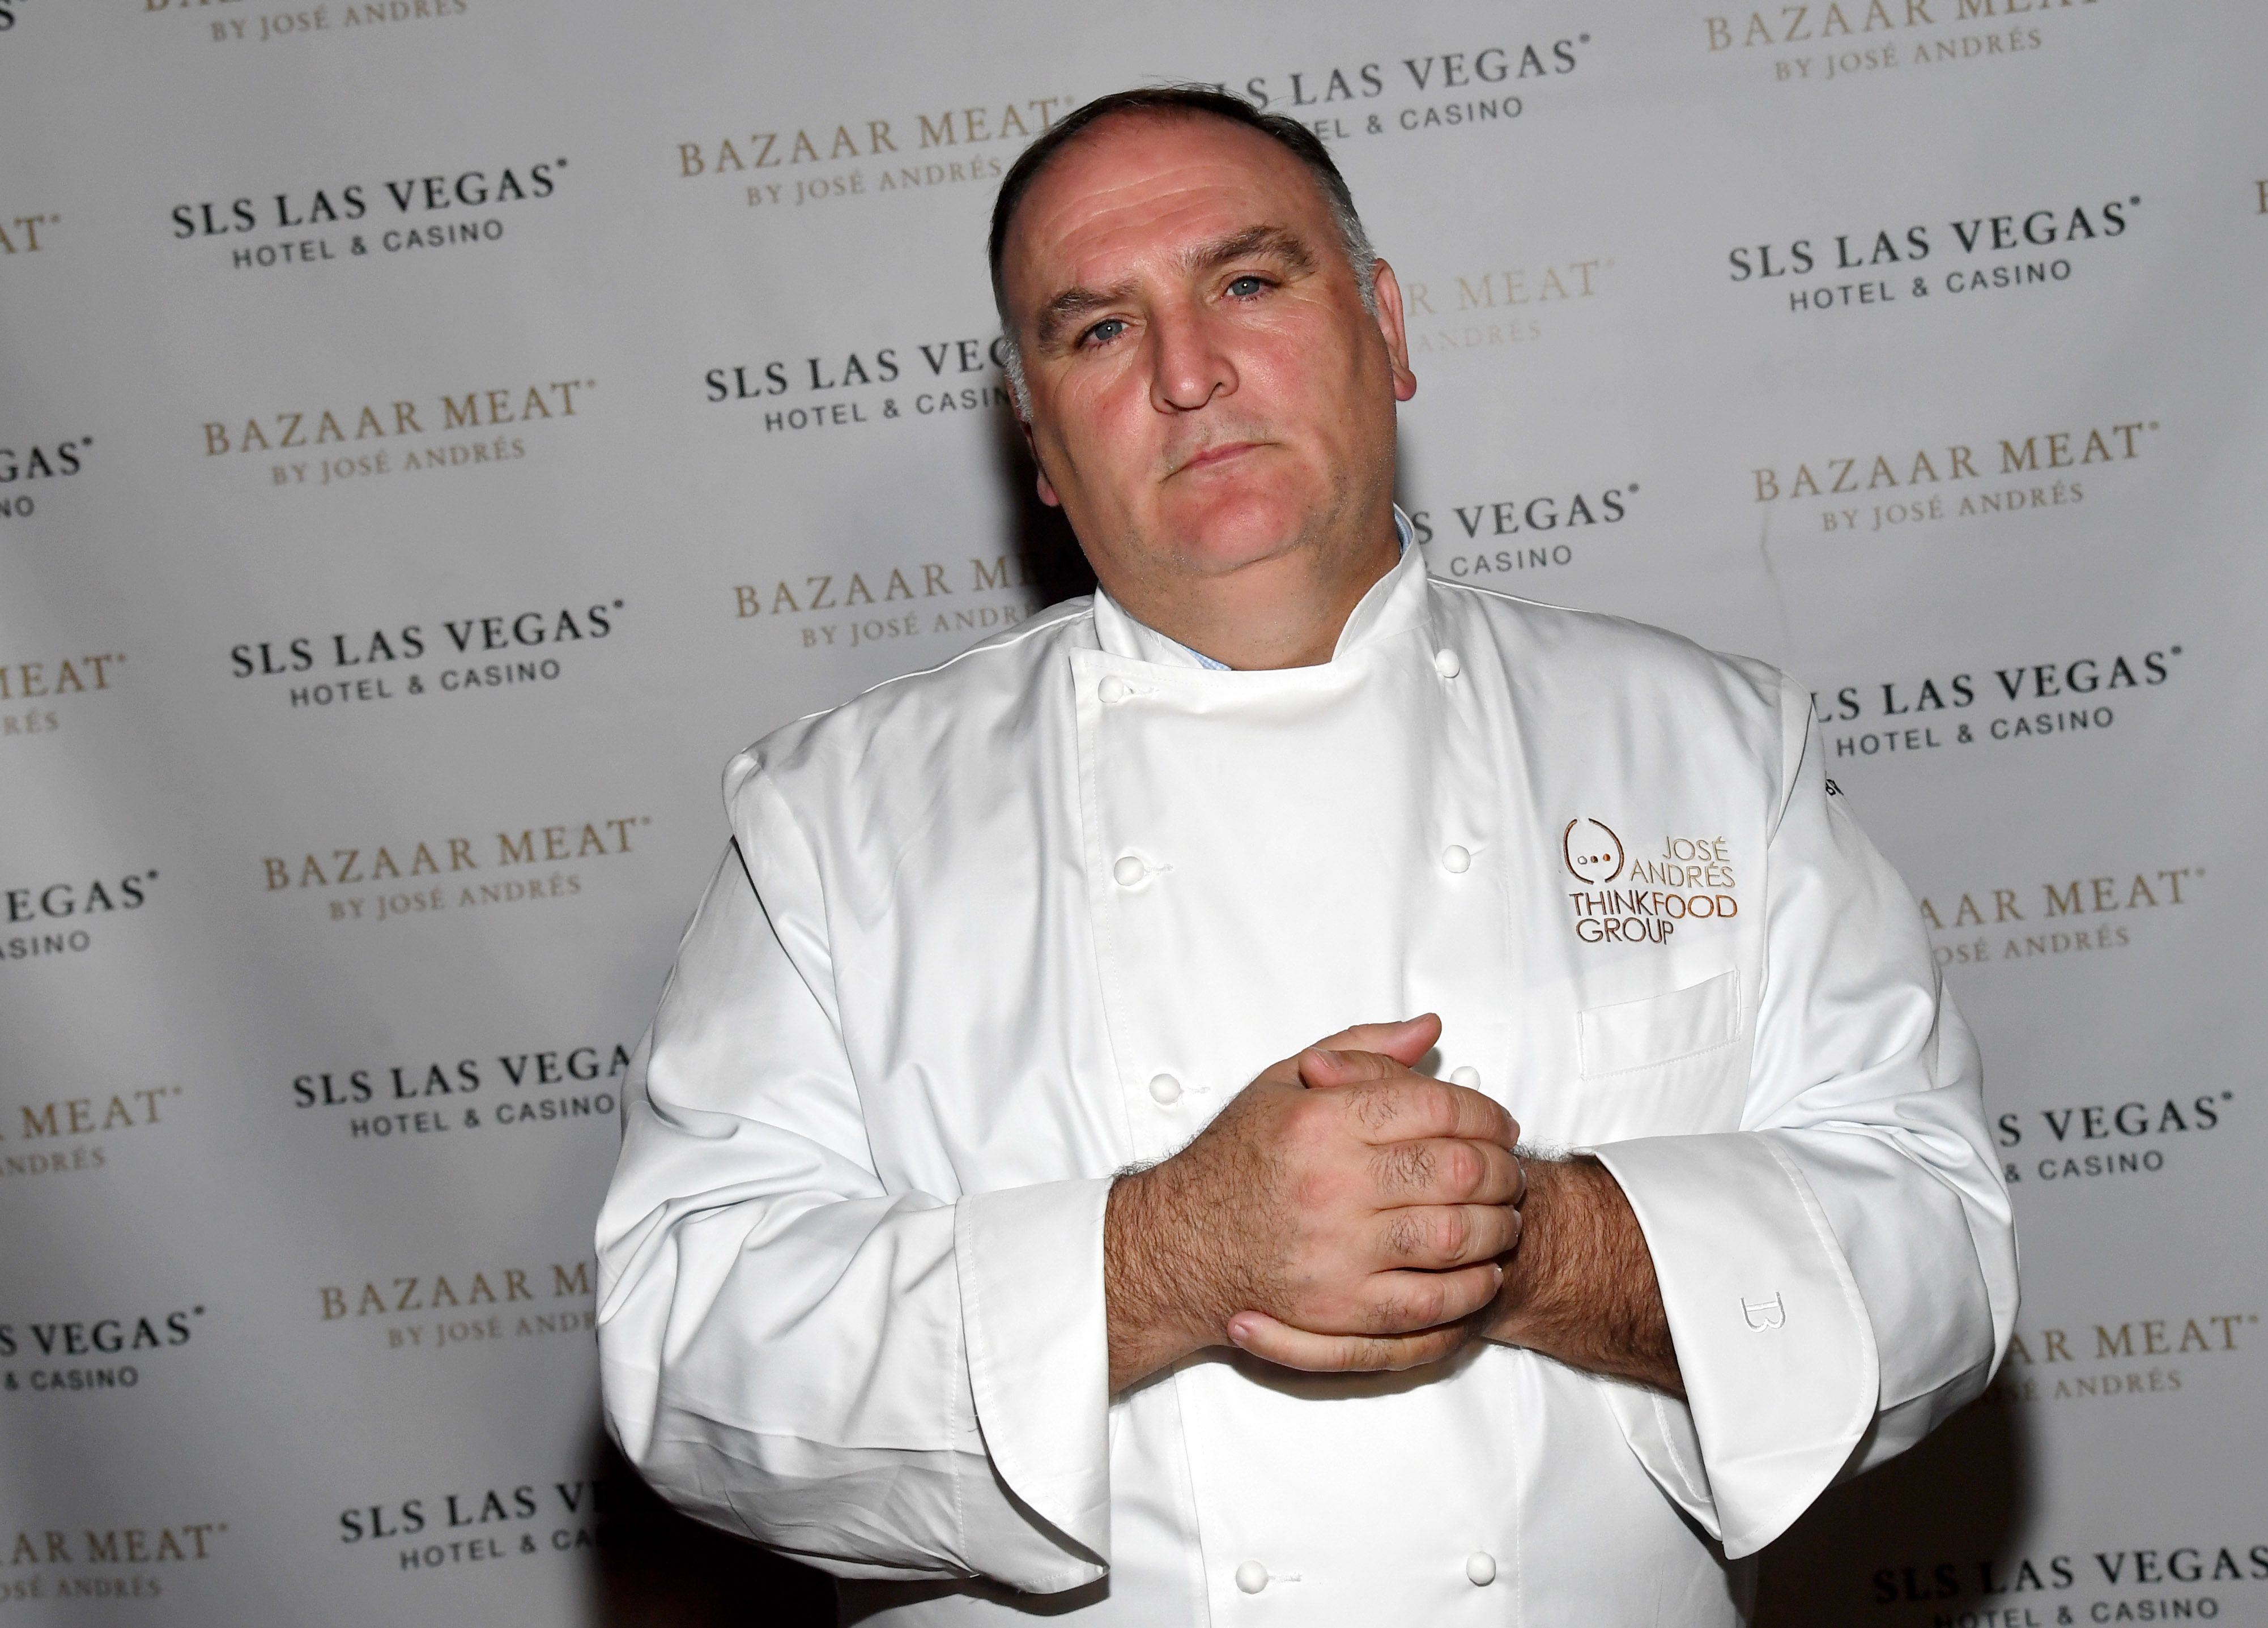 José Andrés stands in front of a step and repeat